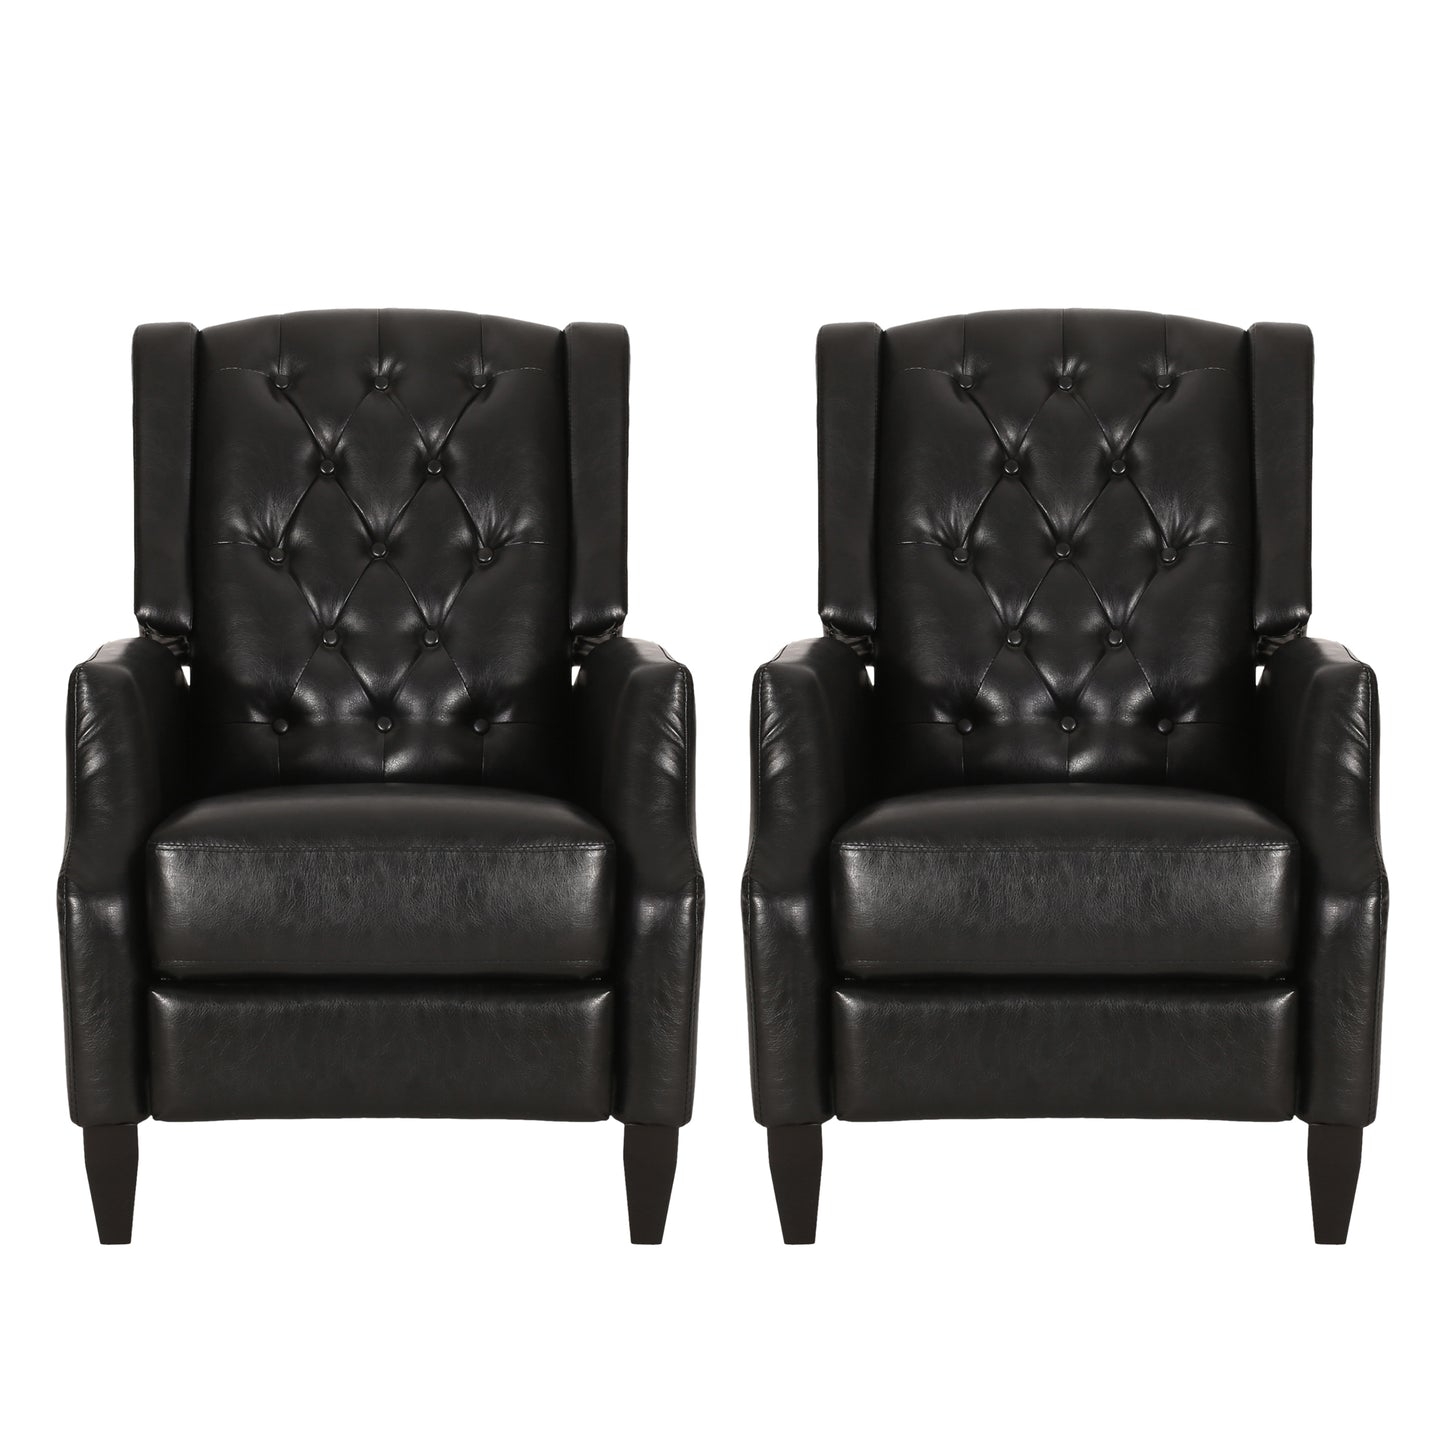 Loubar Contemporary Faux Leather Tufted Pushback Recliners, Set of 2